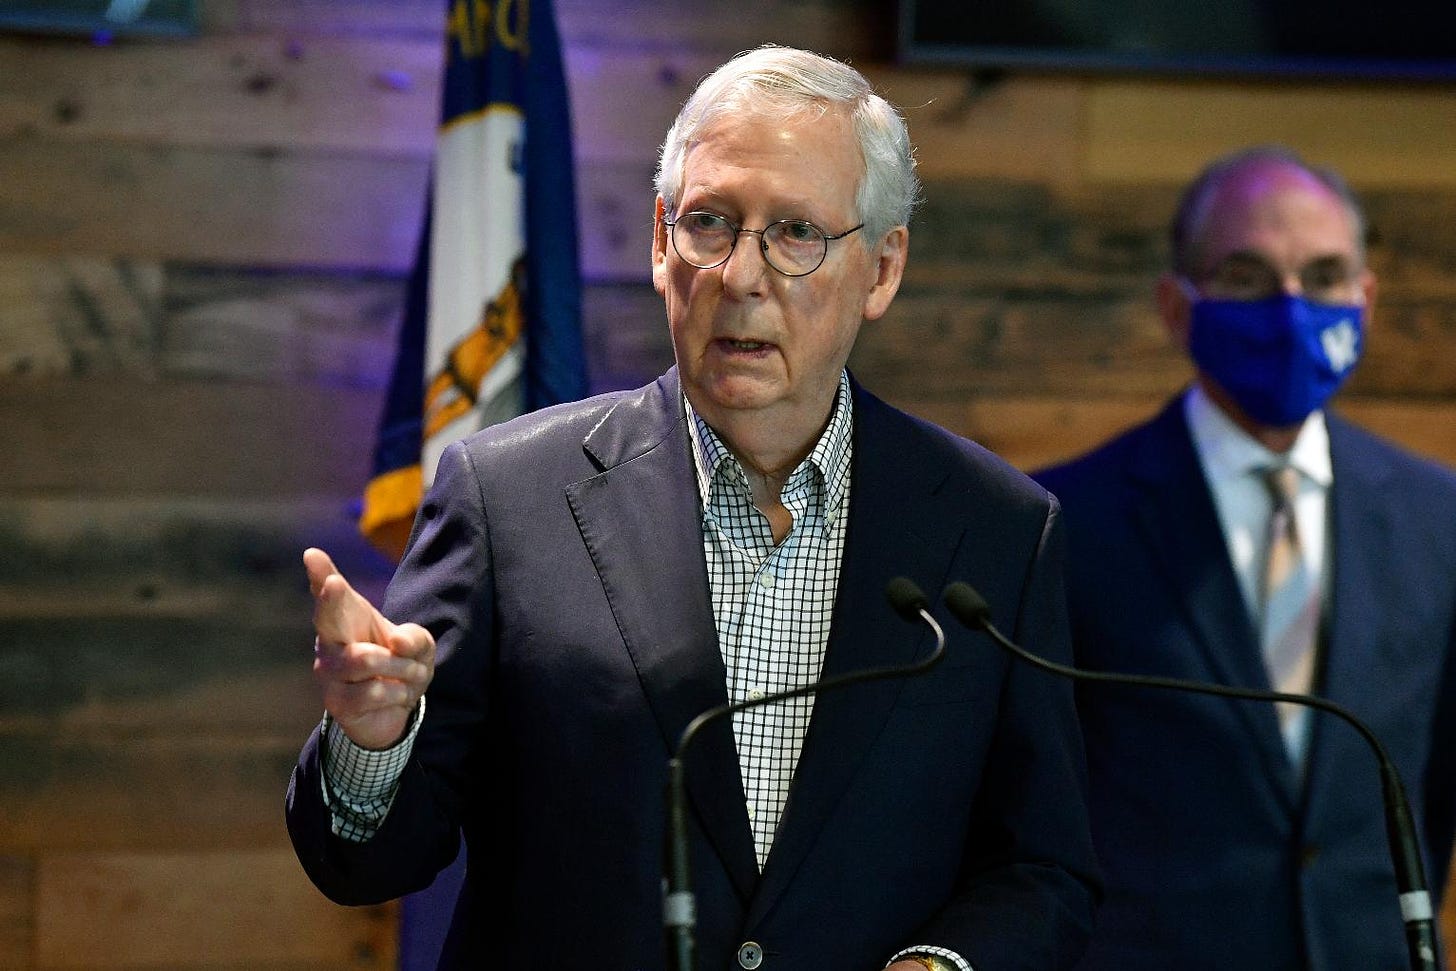 After New Law, McConnell Warns CEOs: 'Stay Out of Politics' | Political  News | US News